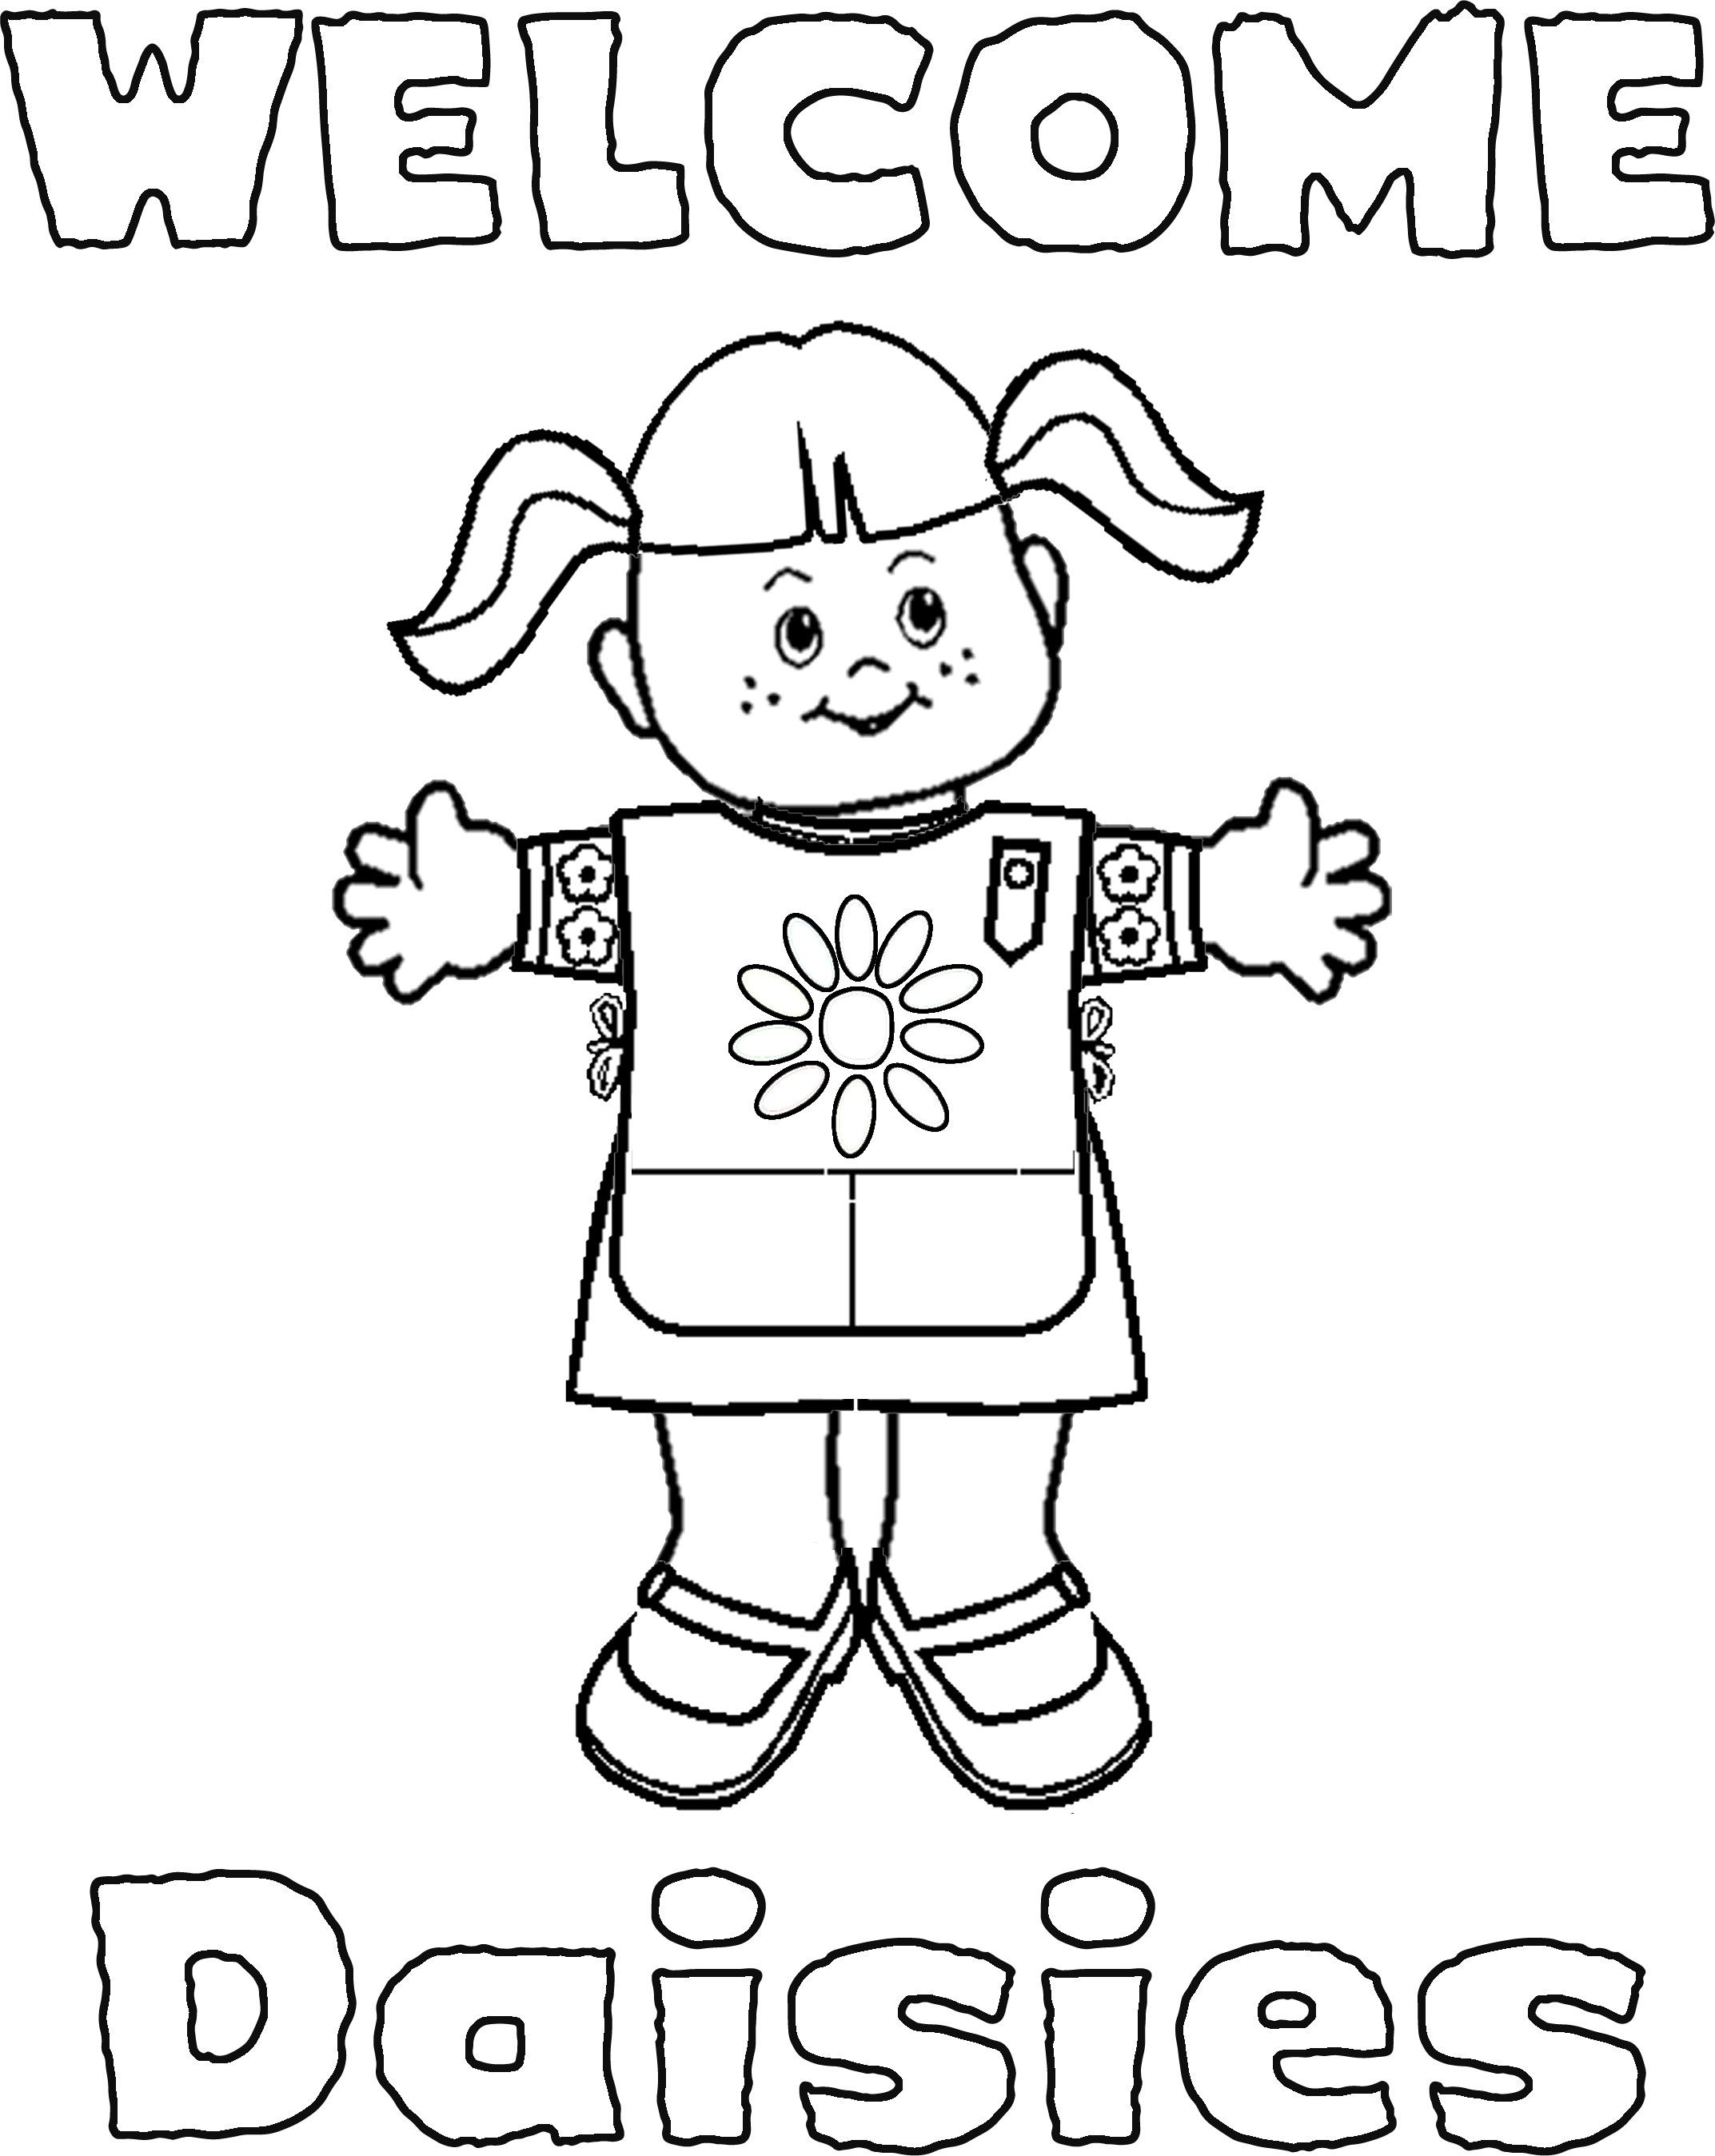 Daisy Coloring Pages | Daisy girl ...